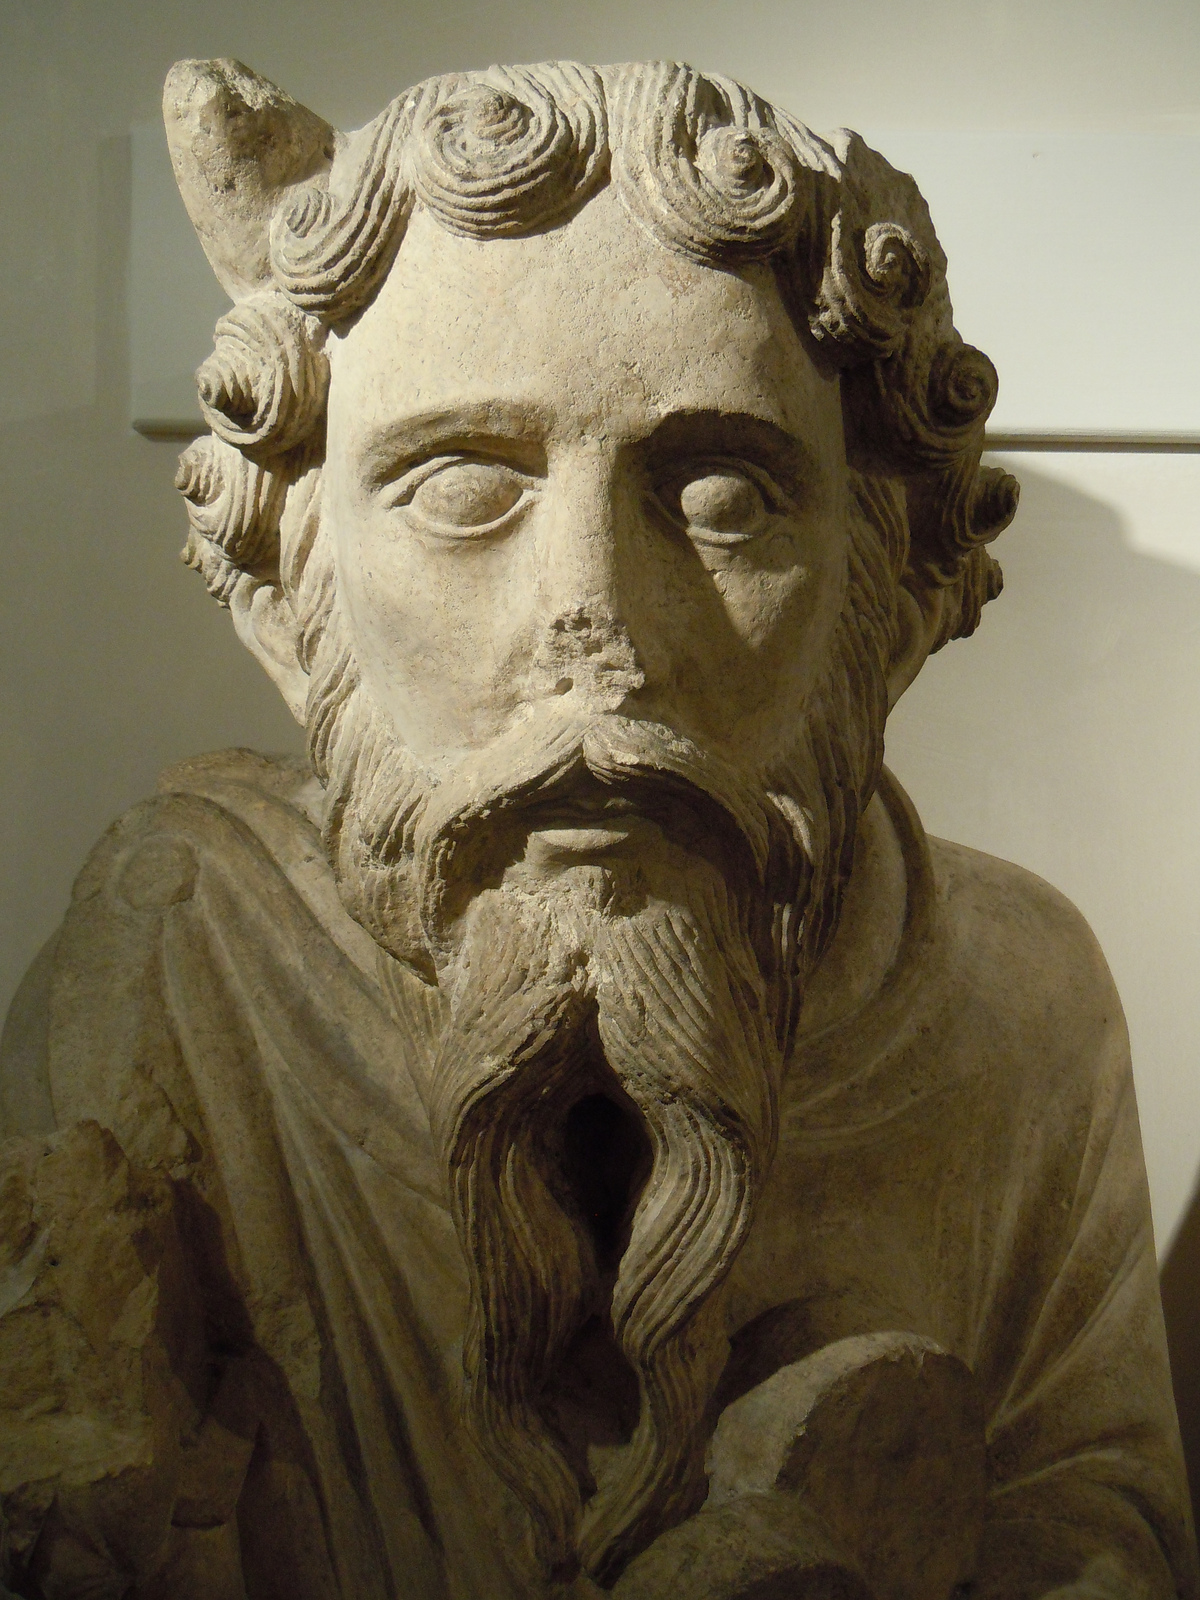  Statue of Moses c.1150-1200, St. Mary's Abbey, now in the Yorkshire Museum. Detail.